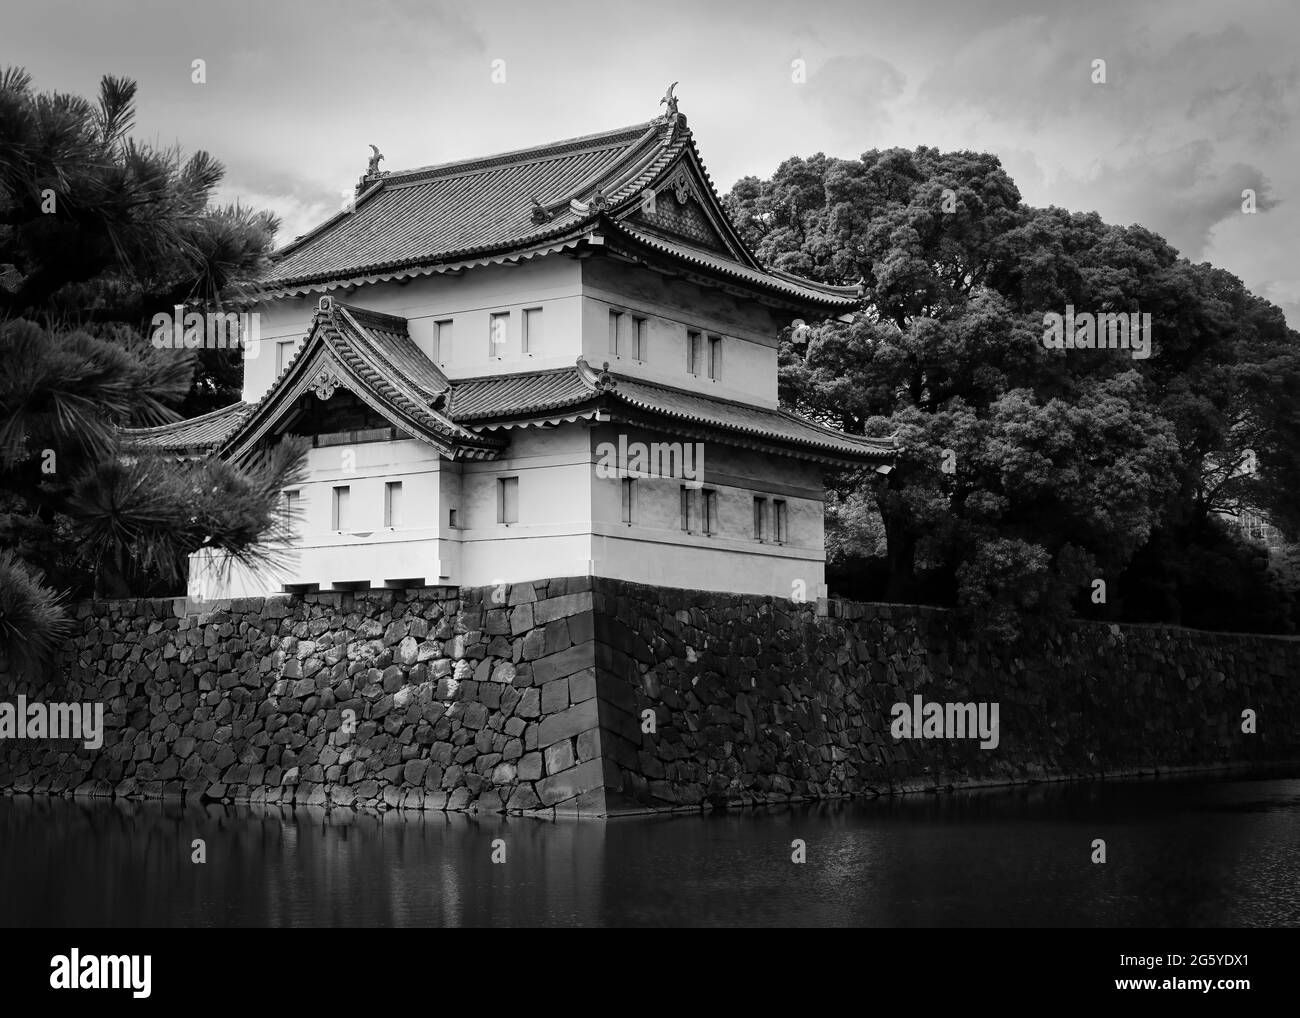 The moat of the Imperial Palace in Tokyo, Japan. Stock Photo